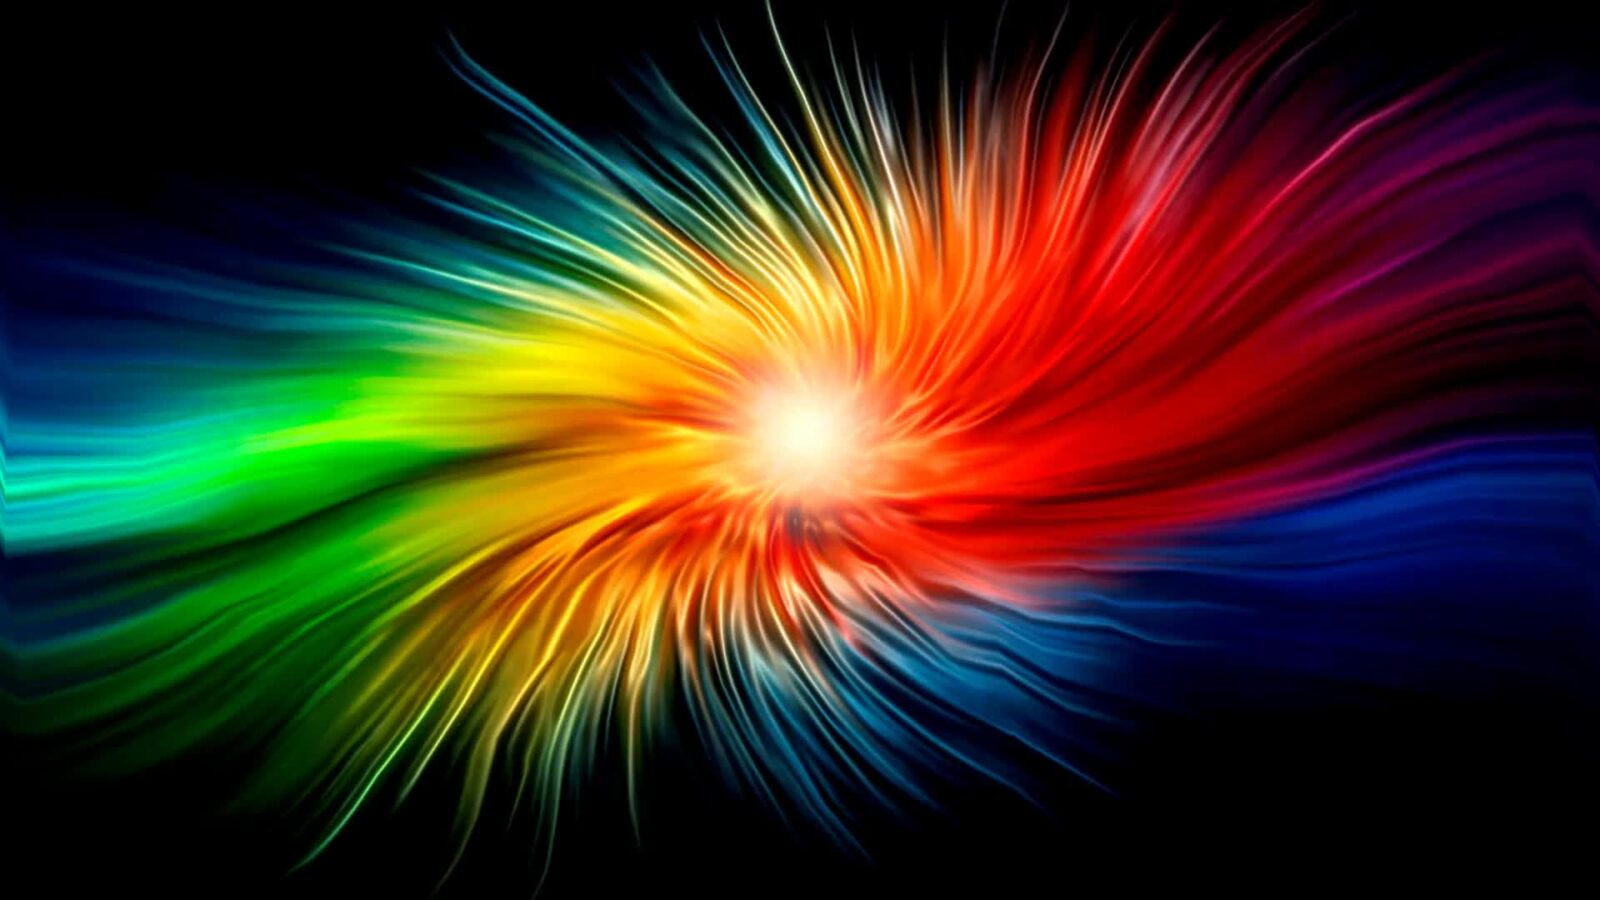 Cool Colorful Rainbow Abstract Art – Free Desktop Wallpaper